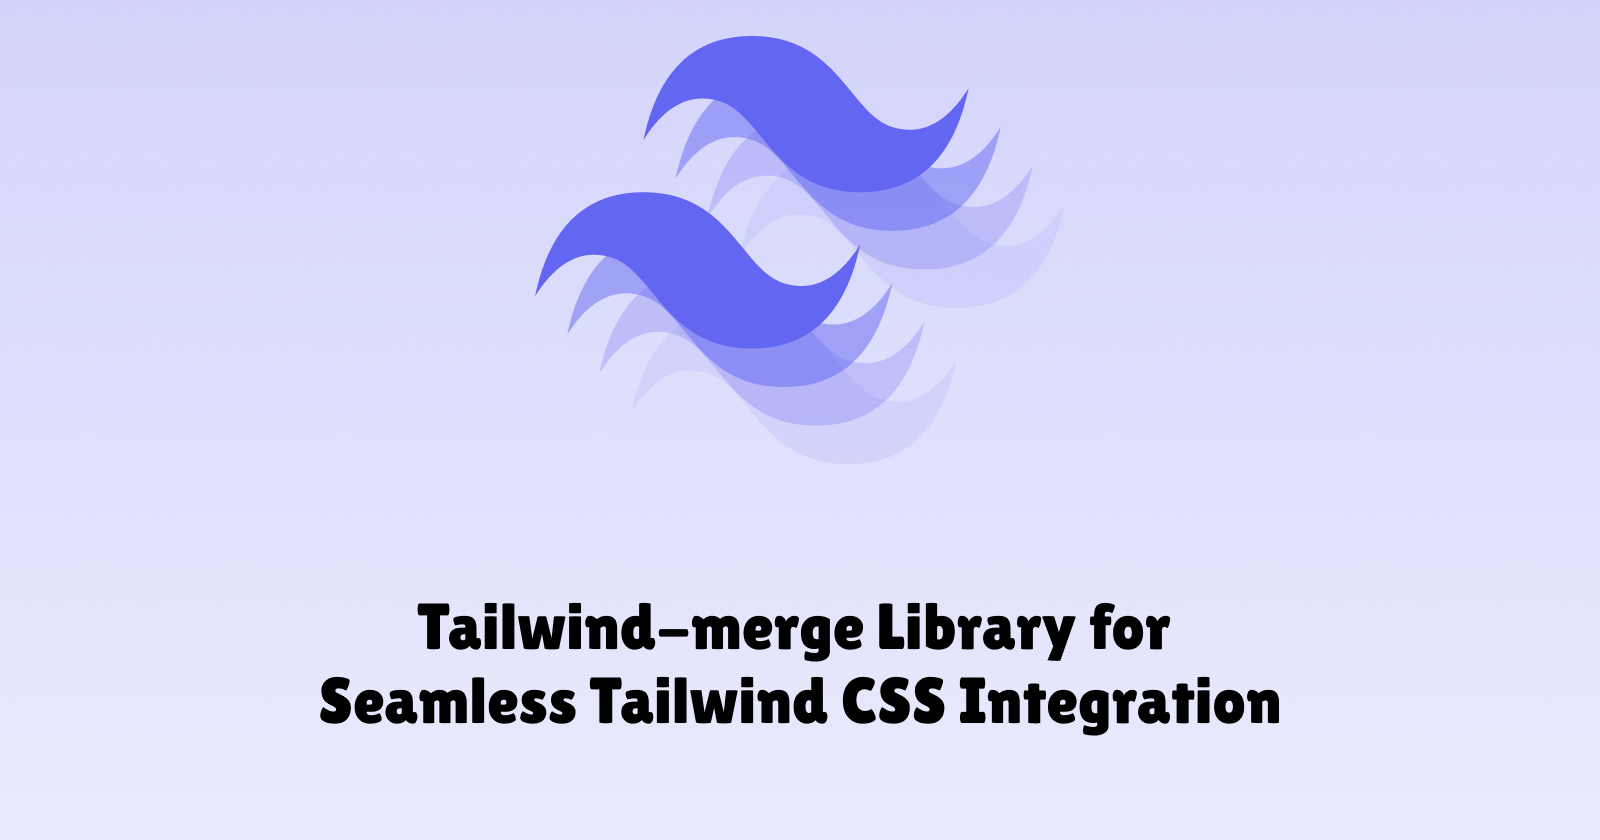 Tailwind-merge Library for Seamless Tailwind CSS Integration